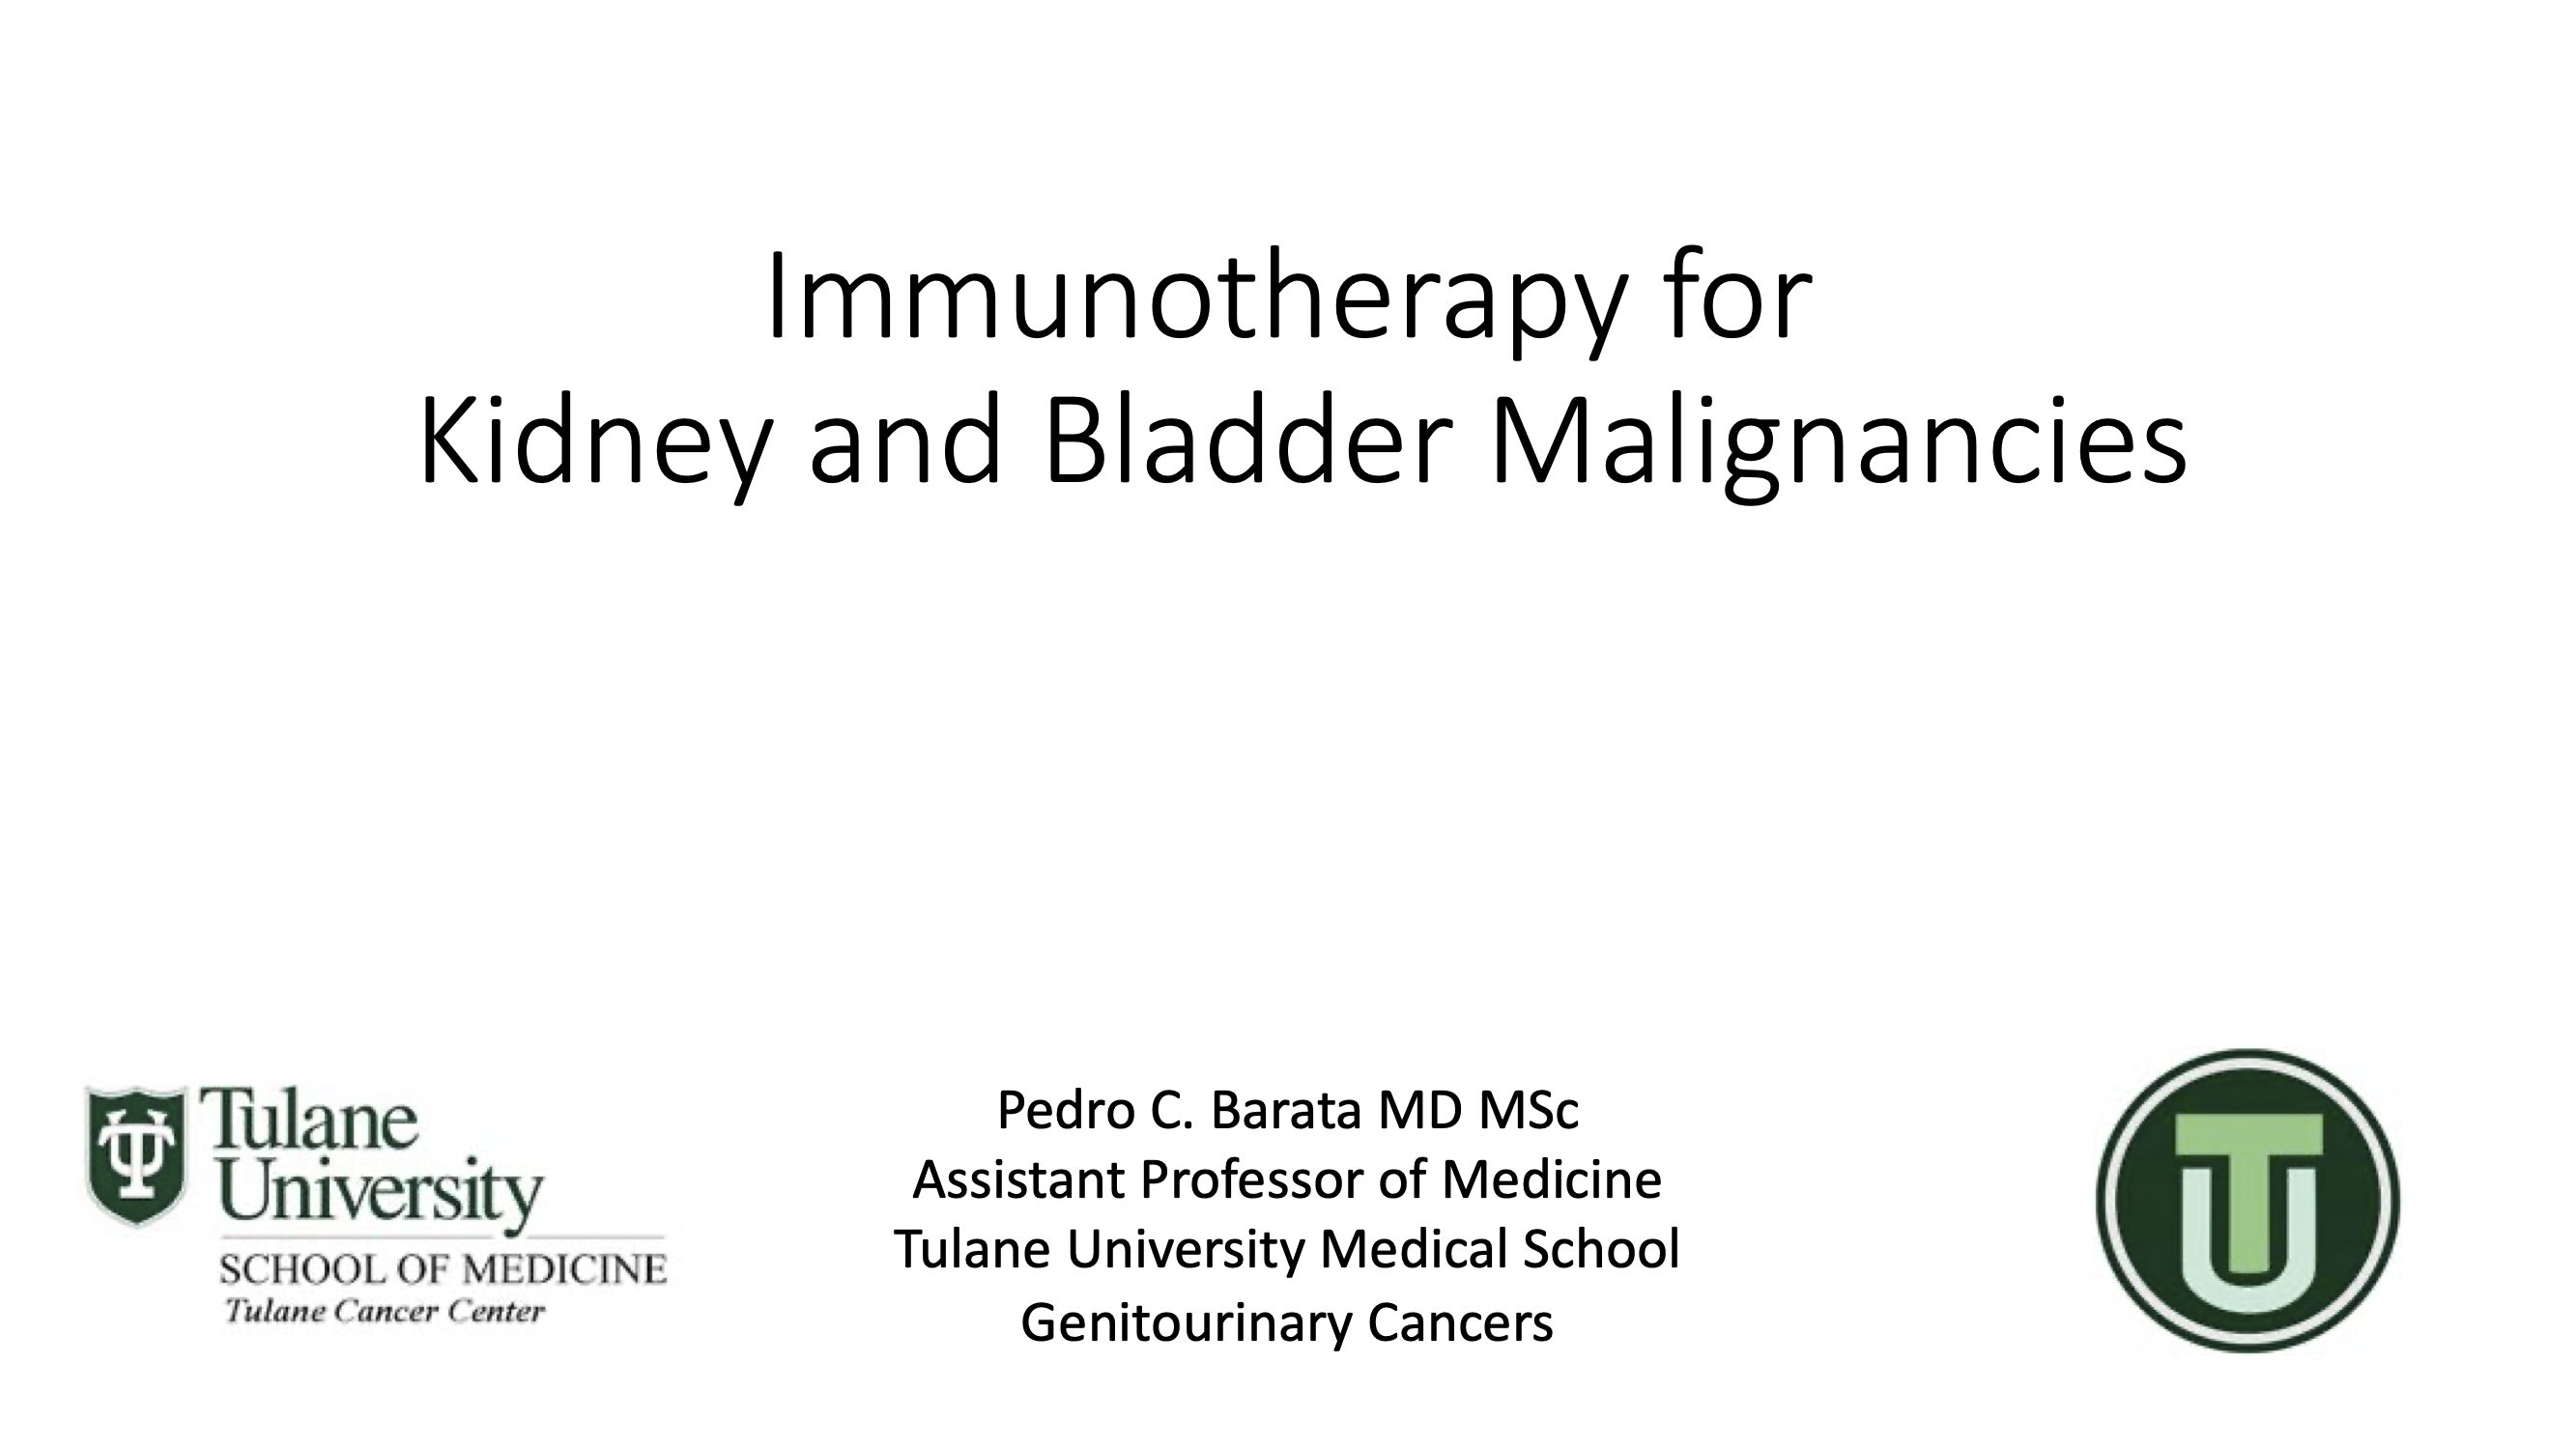 Immunotherapy for Kidney and Bladder Malignancies